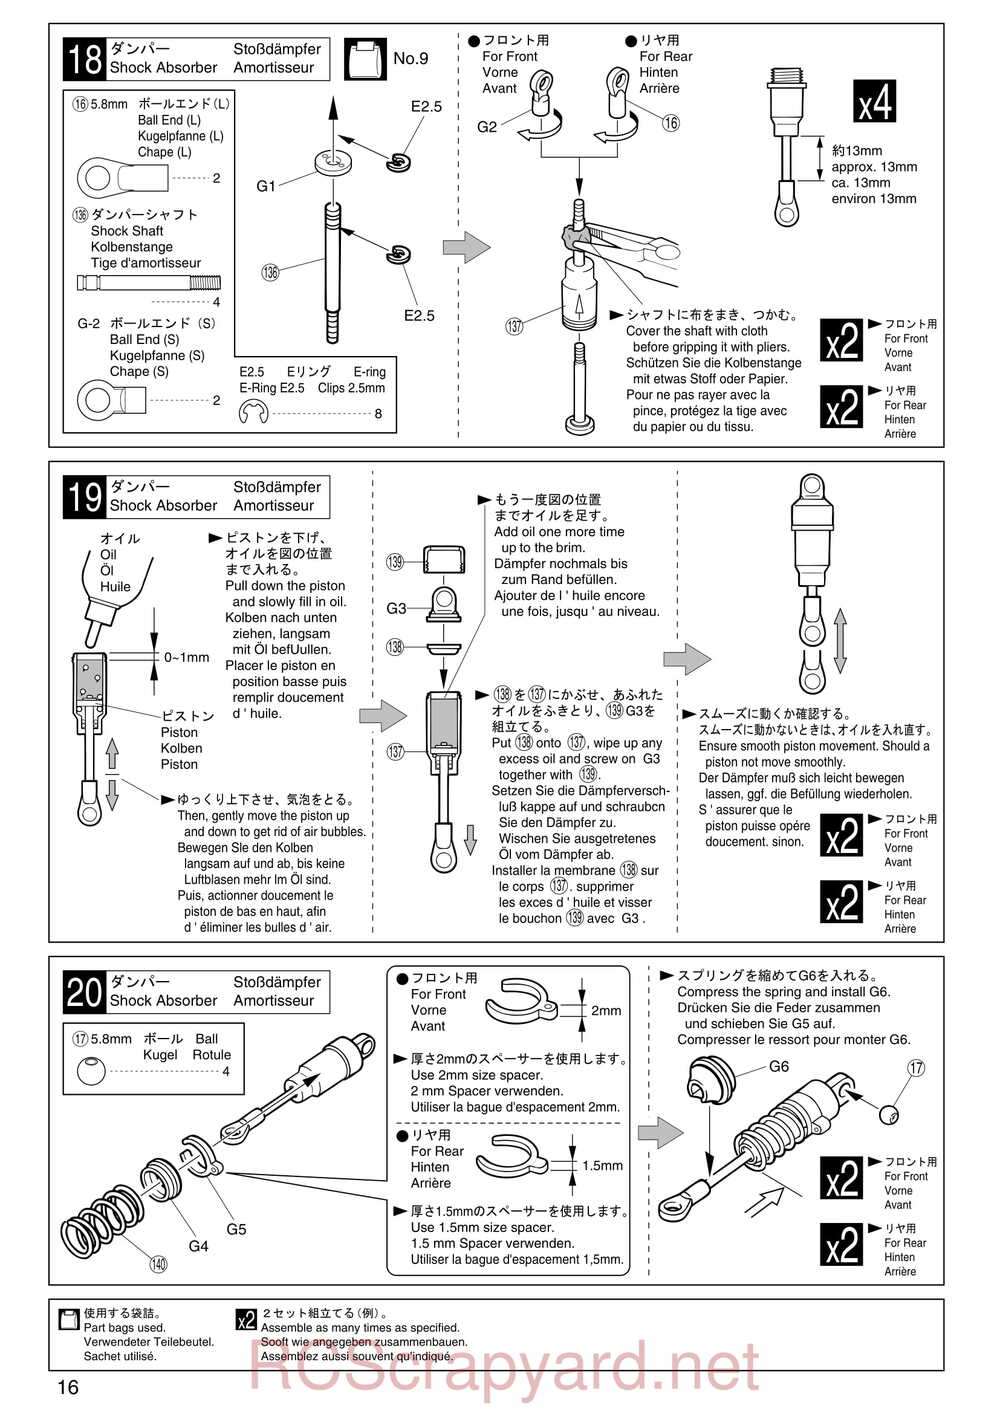 Kyosho - 31241 - V-One-S - Manual - Page 16